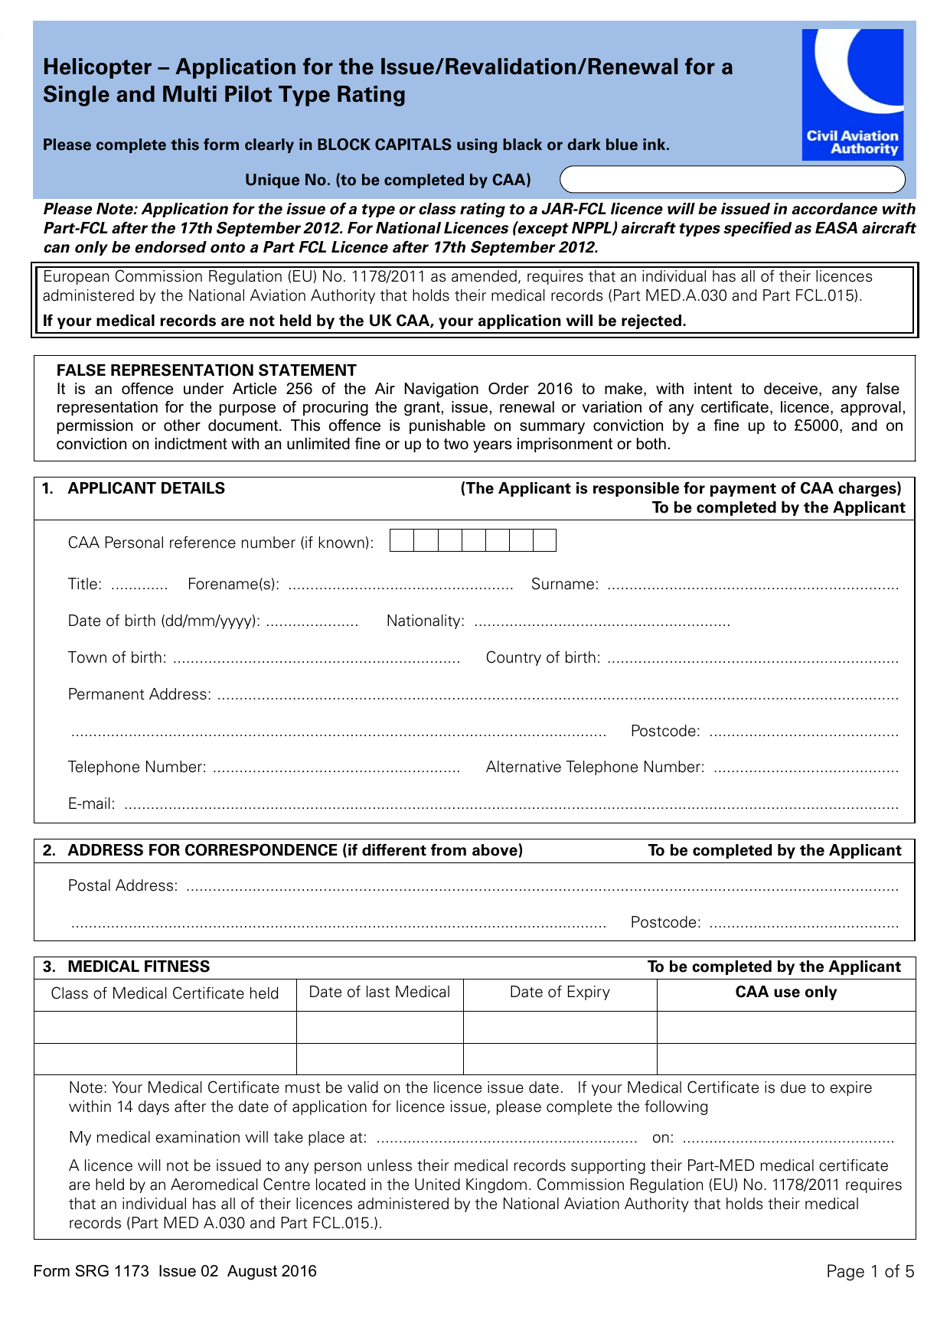 Form SRG1173 Helicopter - Application for the Issue / Revalidation / Renewal for a Single and Multi Pilot Type Rating - United Kingdom, Page 1